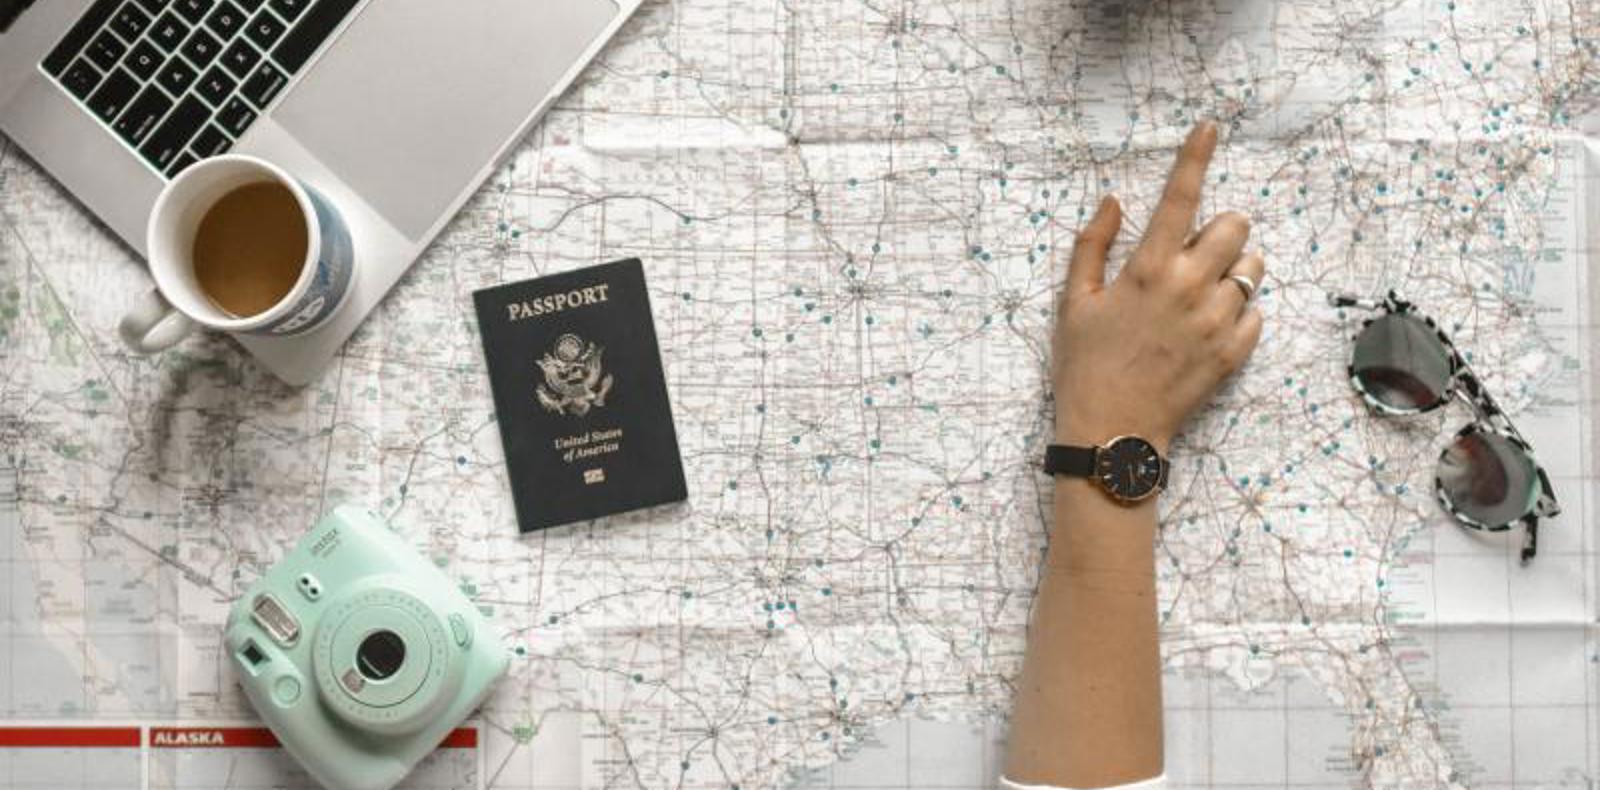 A woman's hand points to a map, laptop, passport, and coffee, indicating travel planning and exploration.